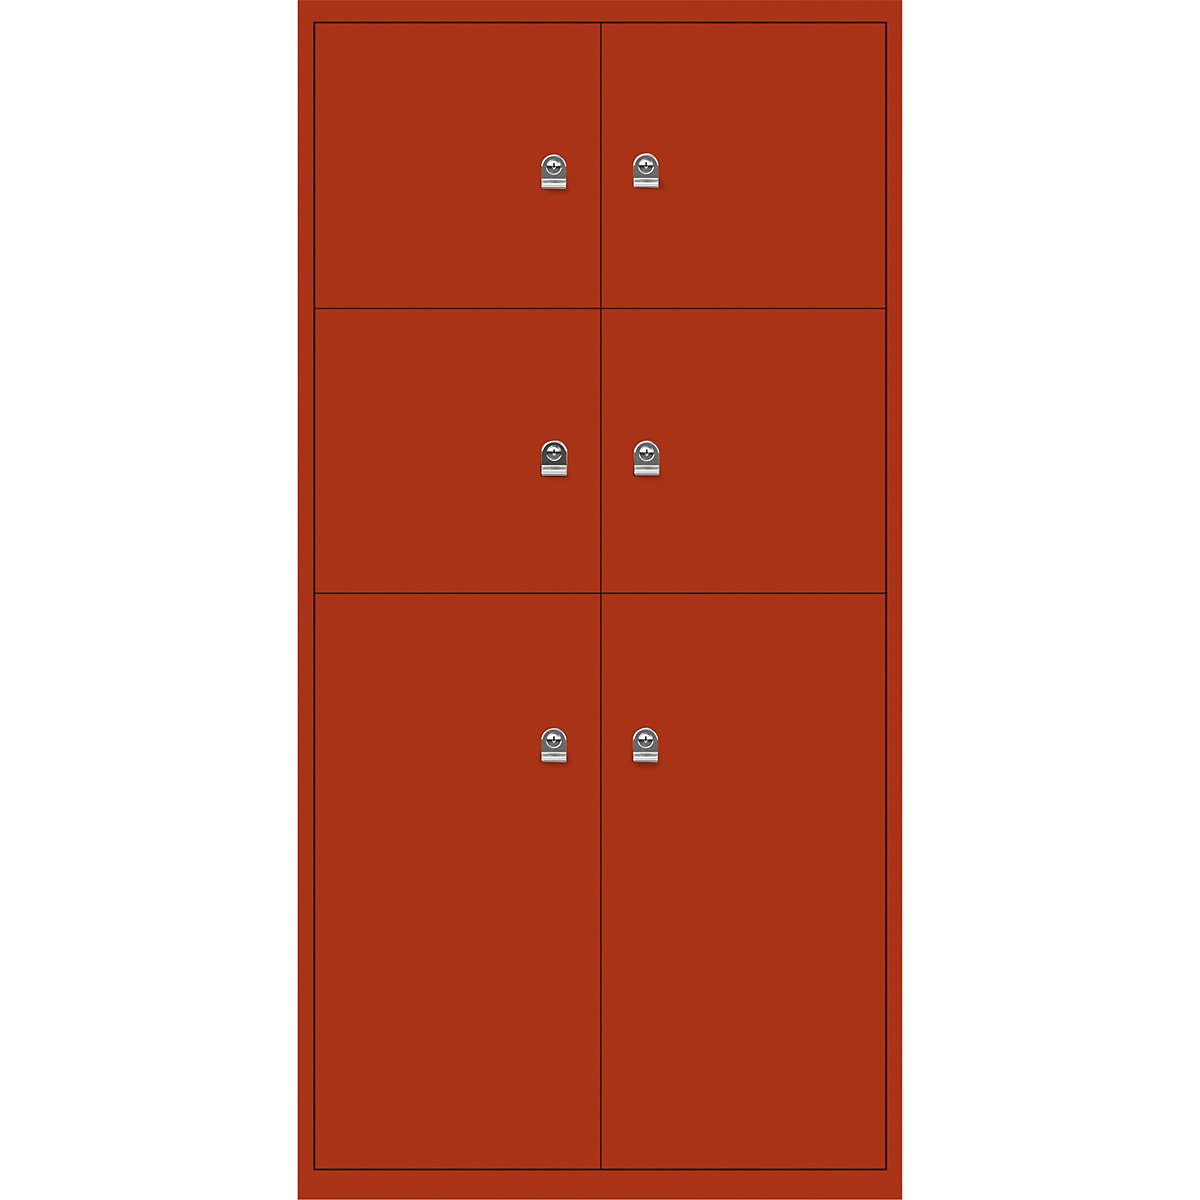 LateralFile™ lodge – BISLEY, with 6 lockable compartments, height 4 x 375 mm, 2 x 755 mm, sevilla-24